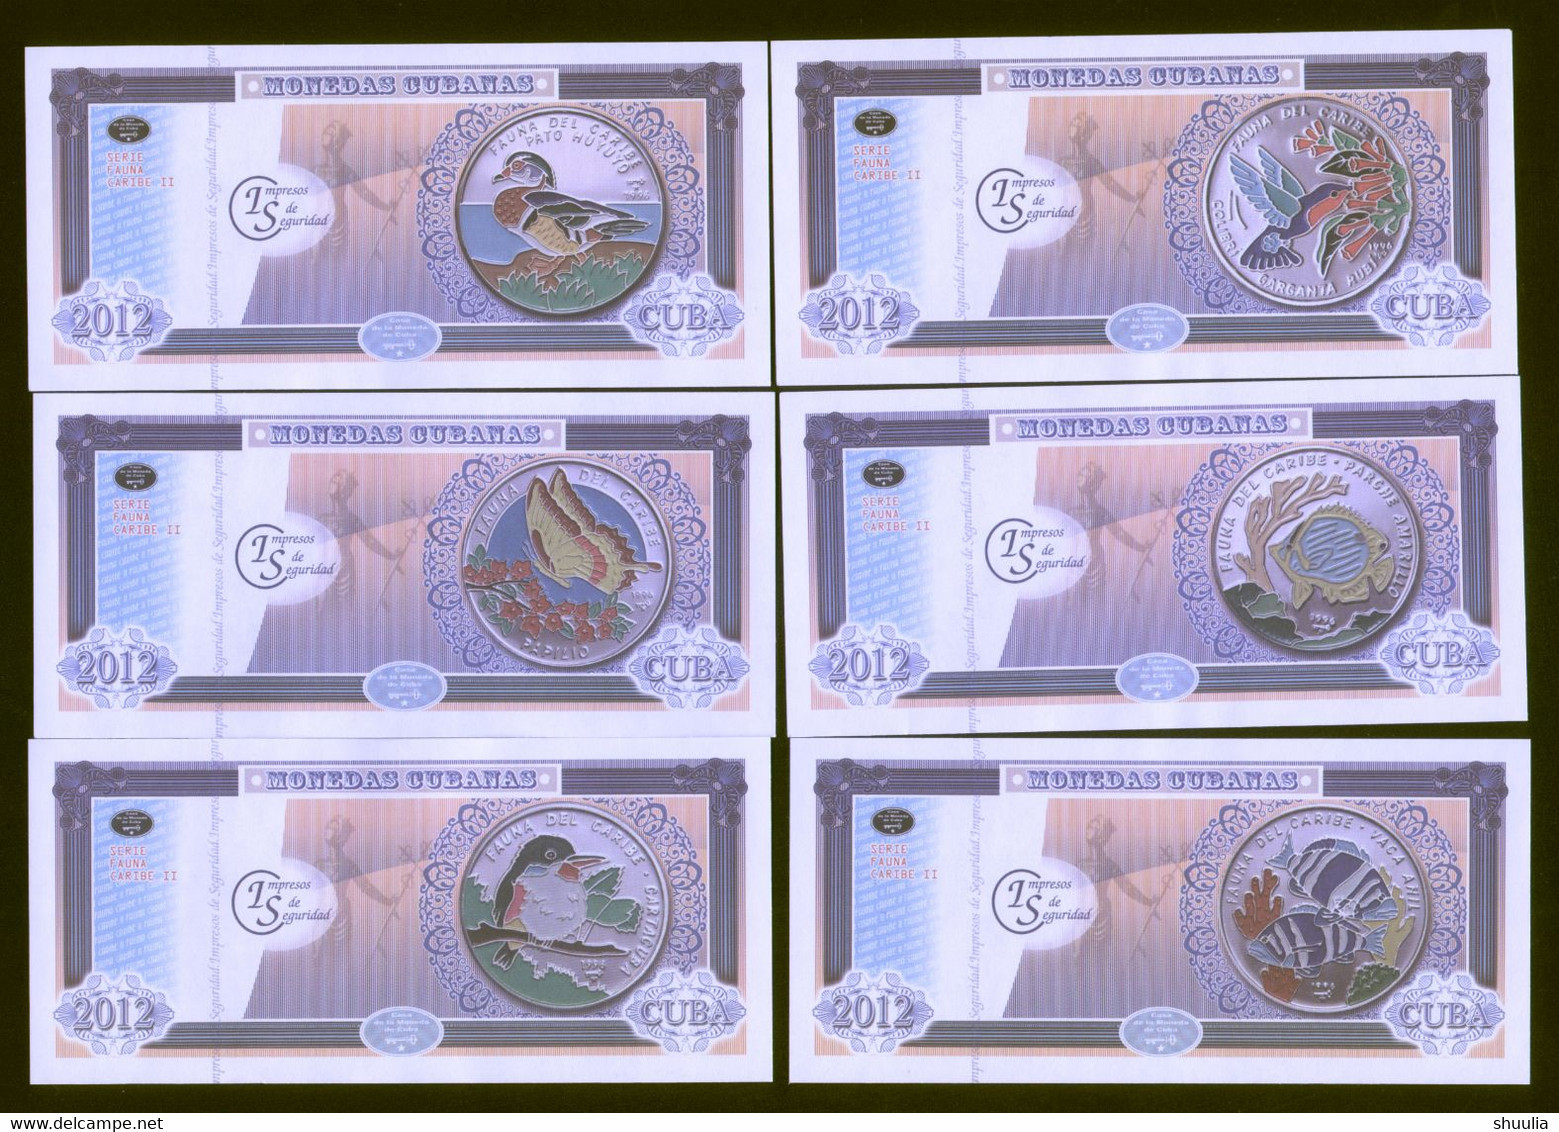 Cuba Caribbean Fauna II 2012 Set Of 6 Featuring Fishes And Birds On Coins. UNC - Cuba